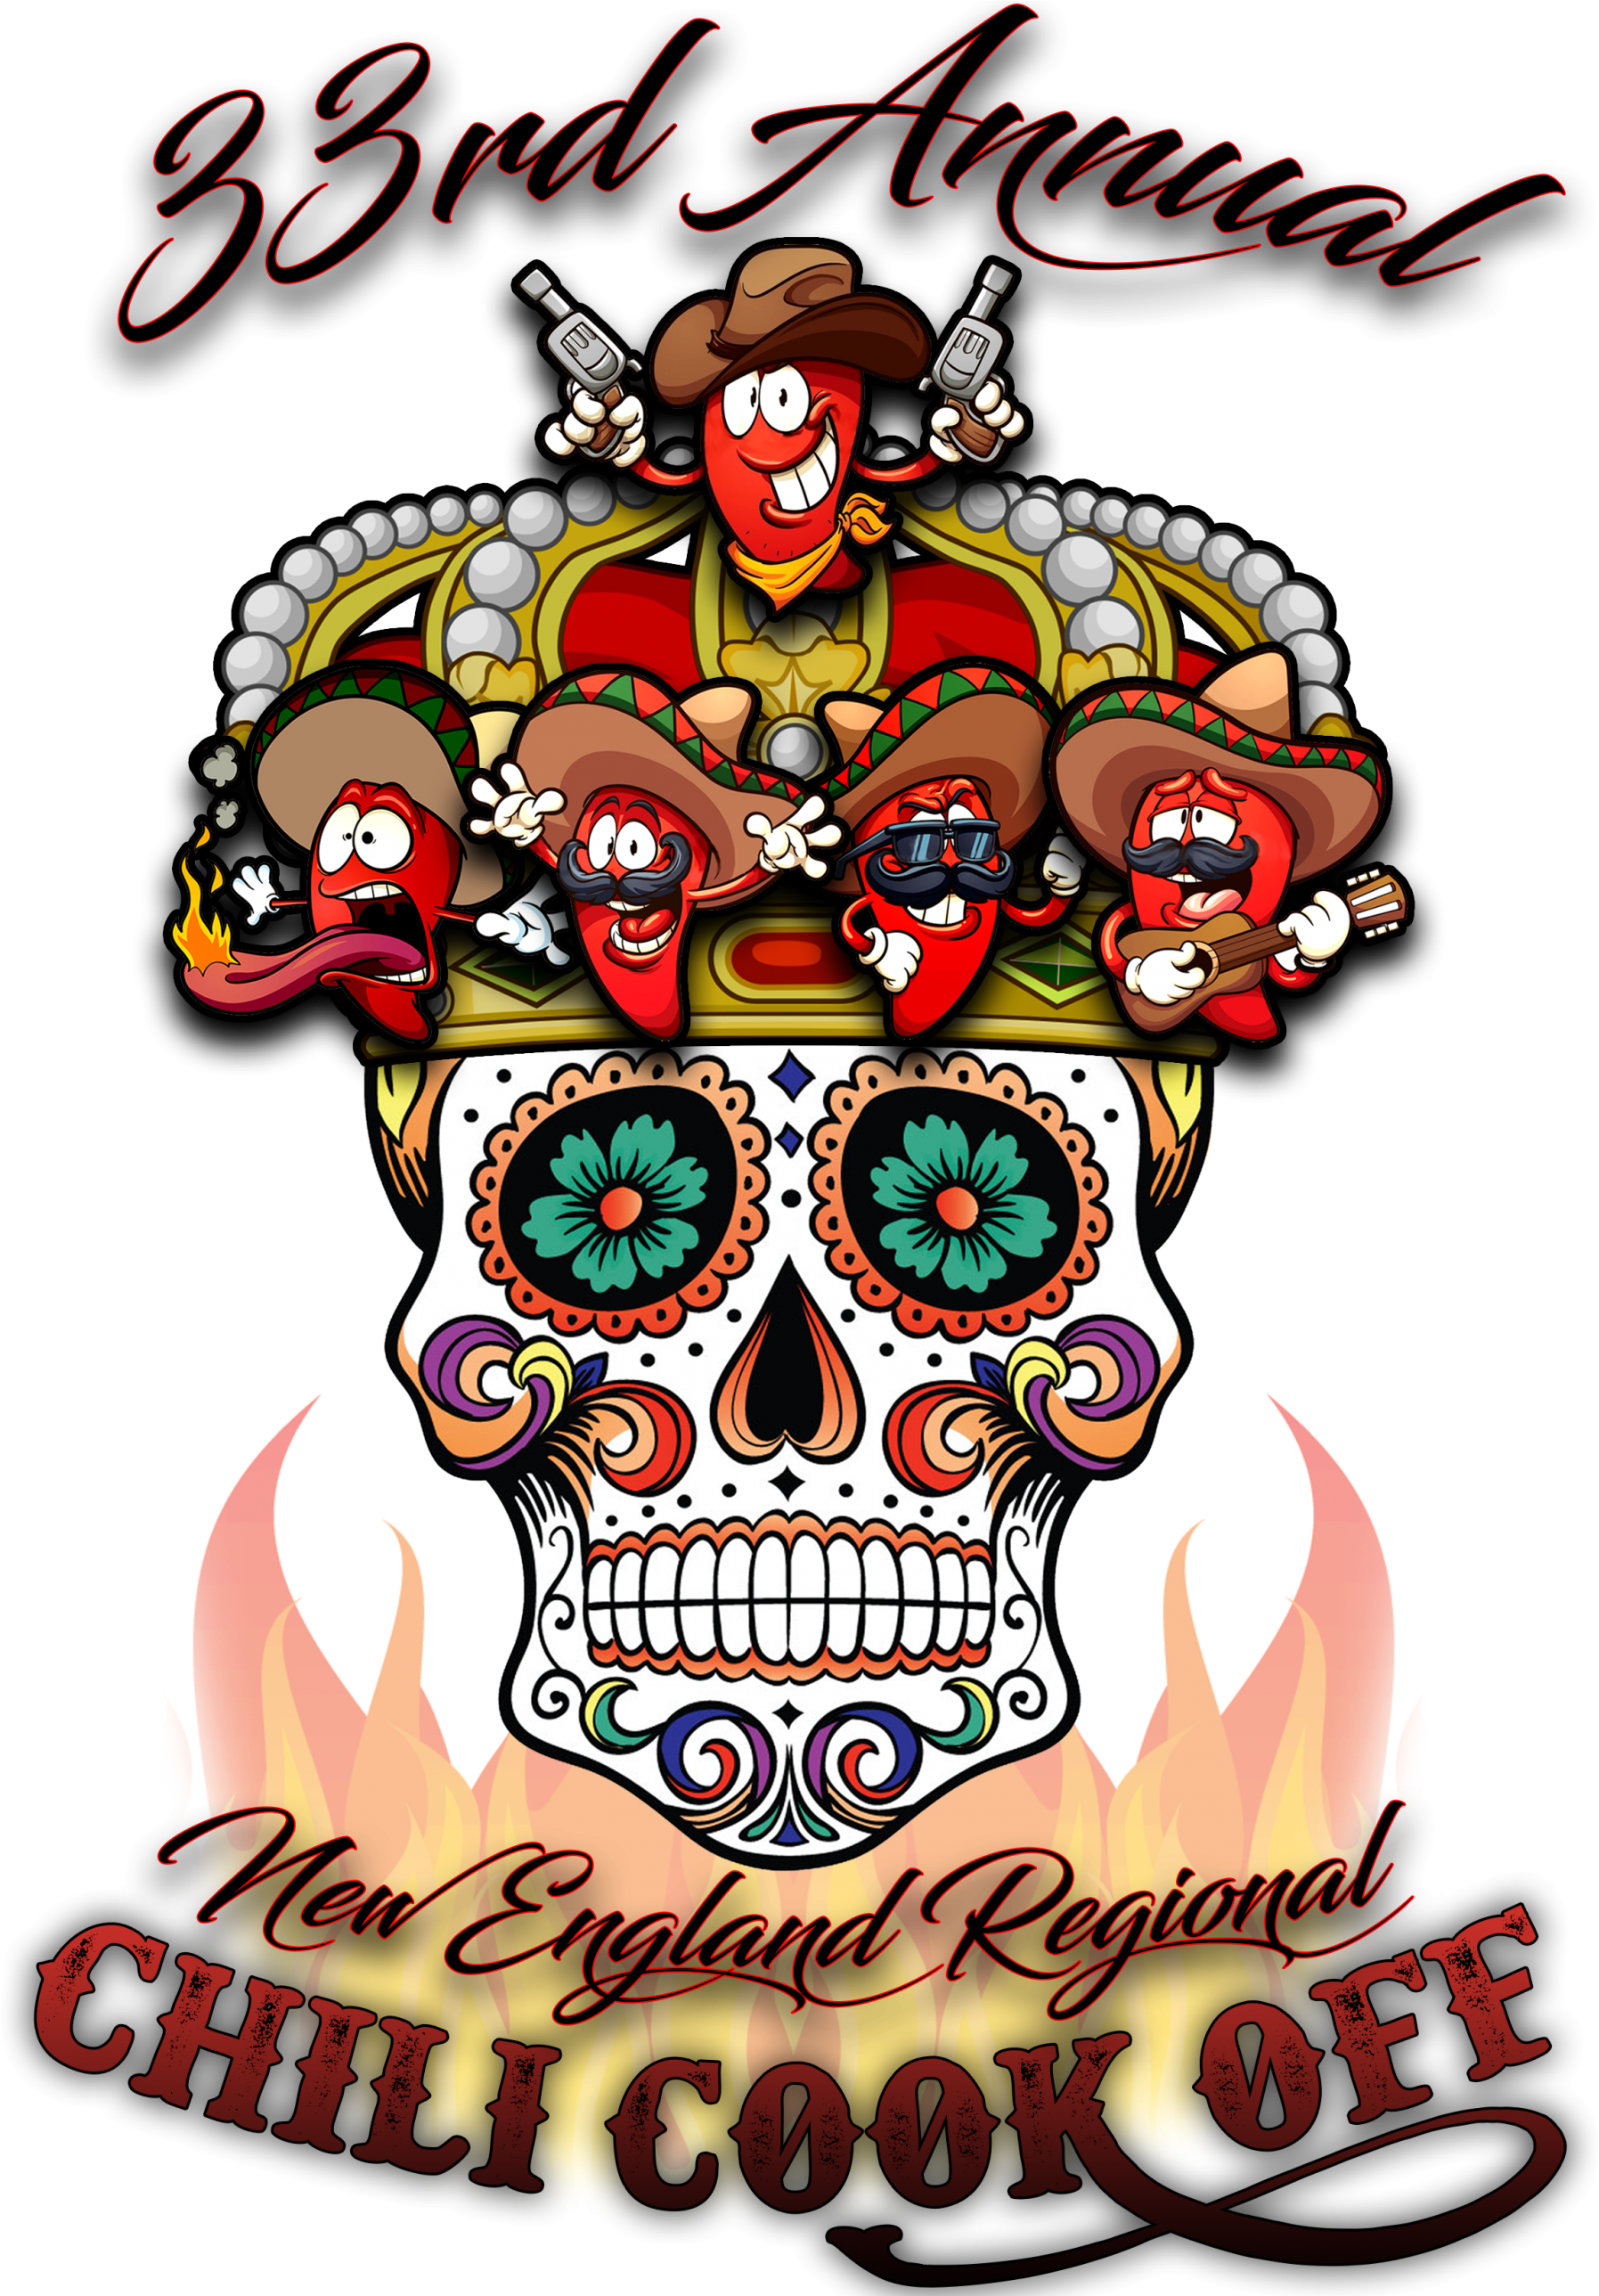 Chilict New England Regional Chili Cook Off Rh Chilict - Sugar Skull Sugar Skull Sugar Skull Journal (2000x2576)